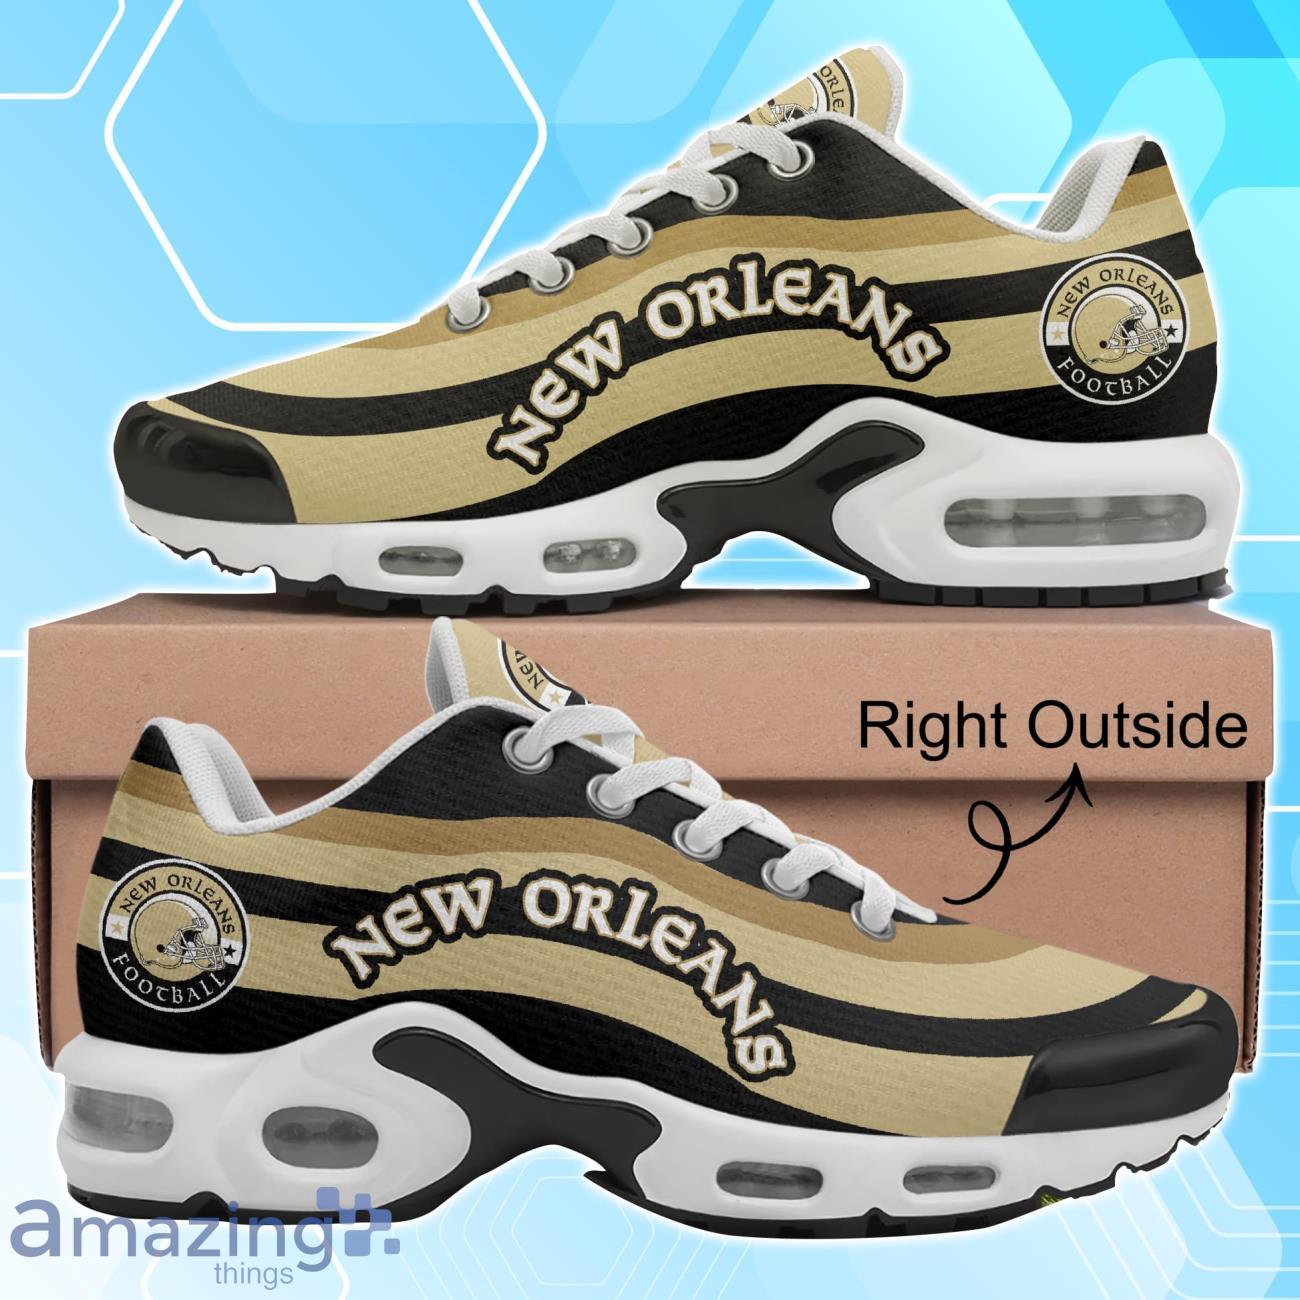 New Orleans Football Air Cushion Shoes Product Photo 2